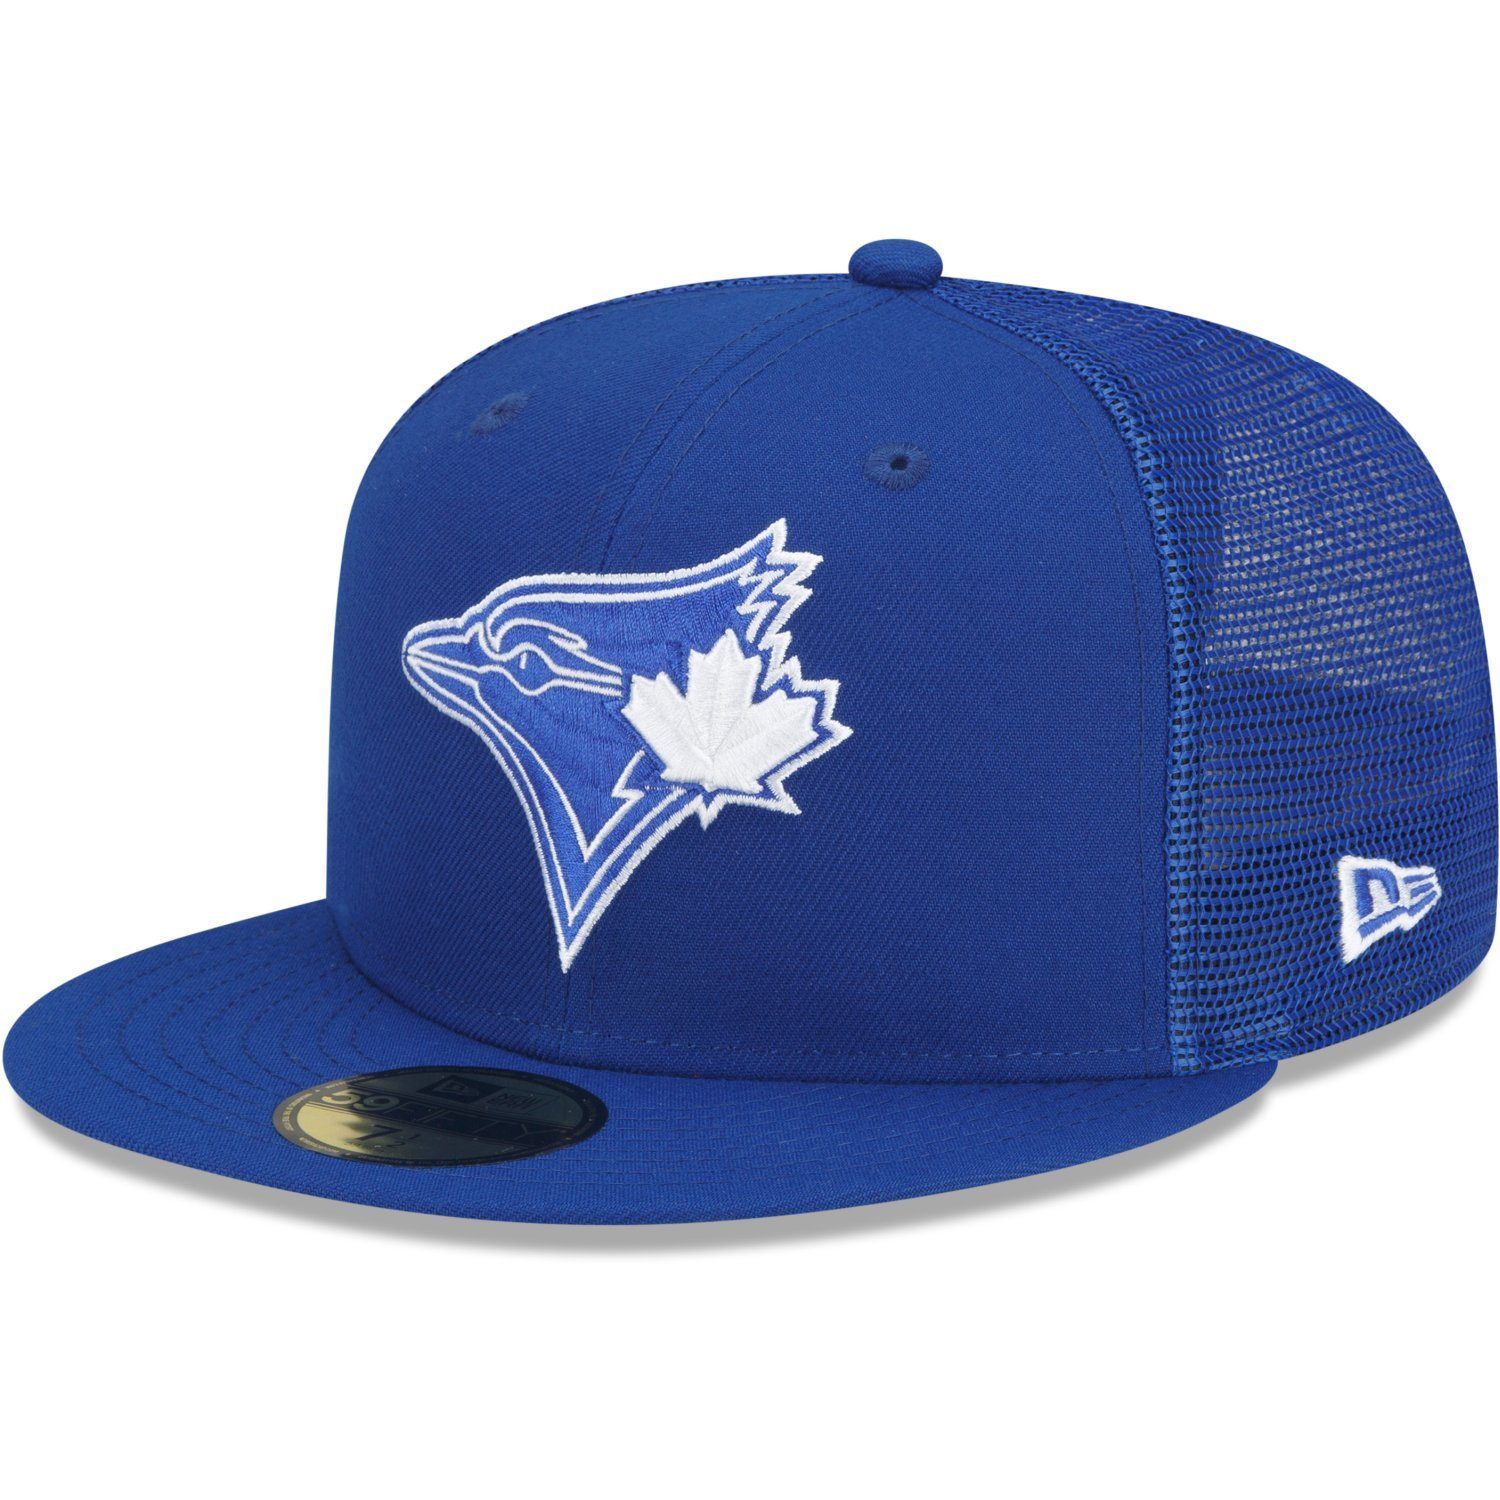 59Fifty Era New Fitted Jays Toronto PRACTICE Cap BATTING